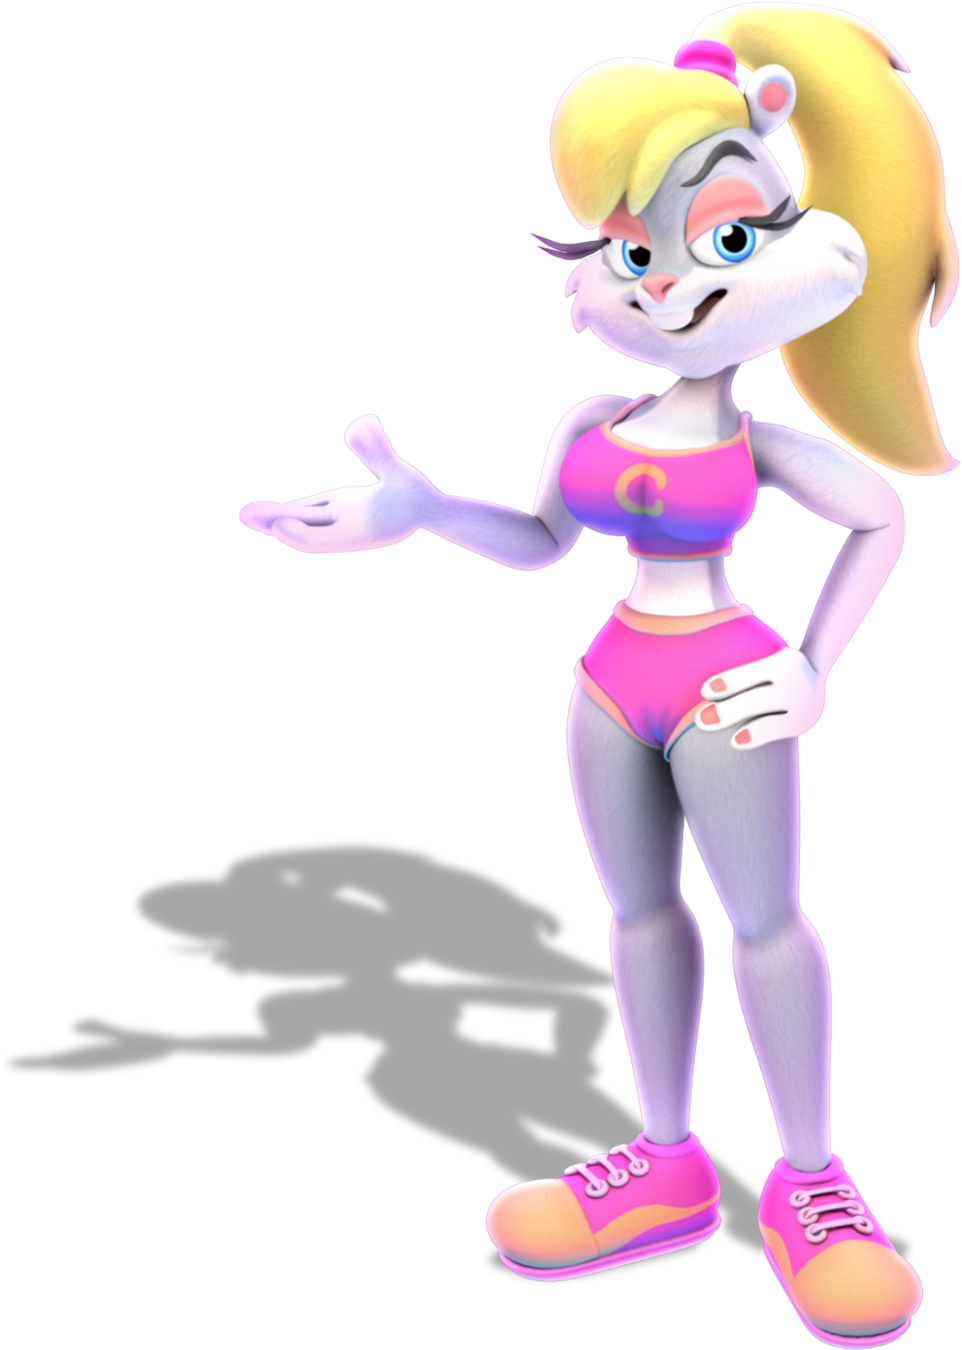 Berri From Conker’s Bad Fur Day - Conkers Bad Fur Day Girl, Hd Png Download